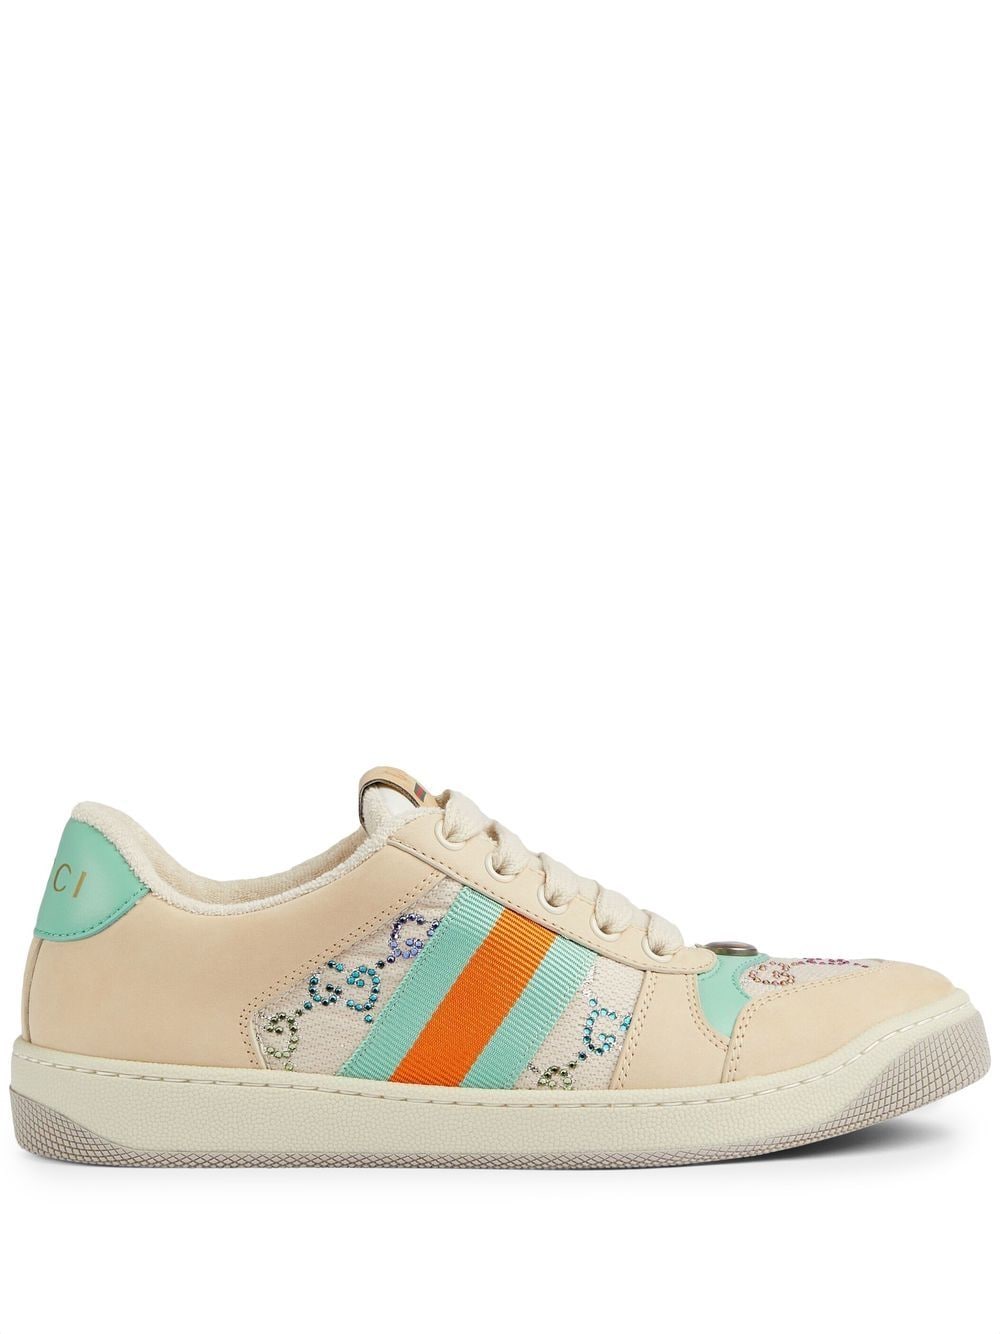 Gucci Turquoise Leather Sneakers For Women In White